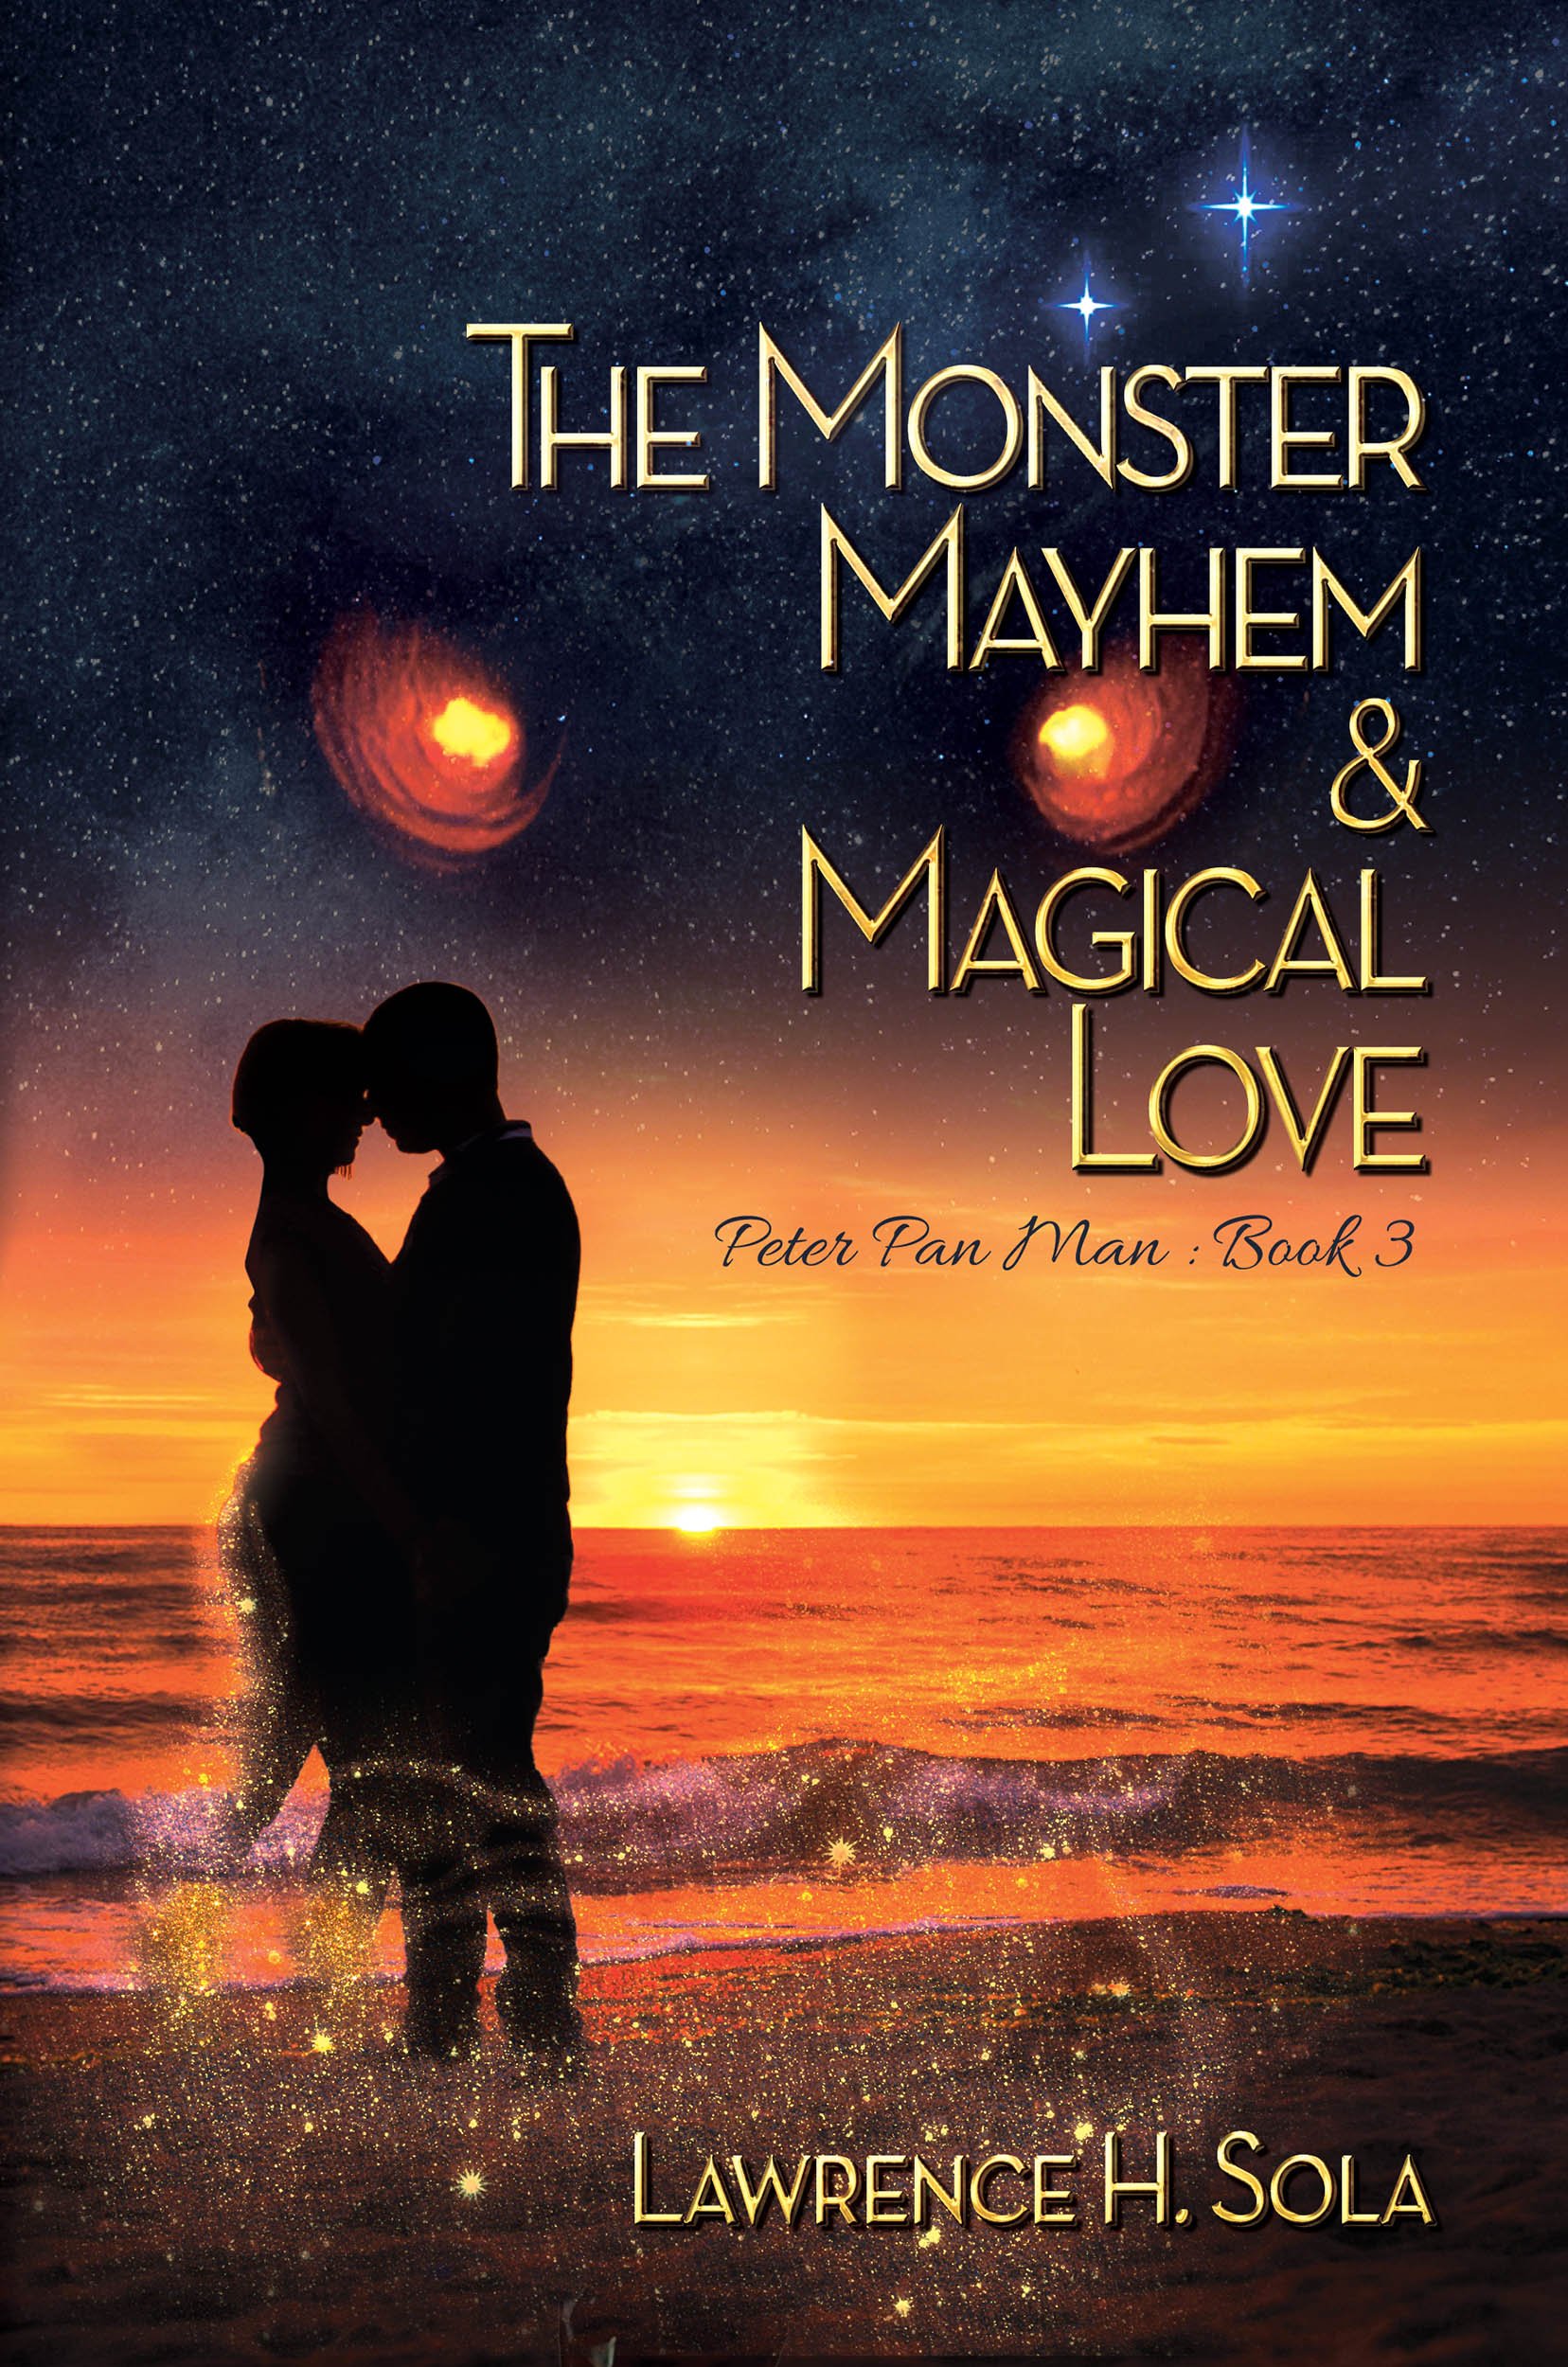 The Monster, Mayhem, and Magical Love